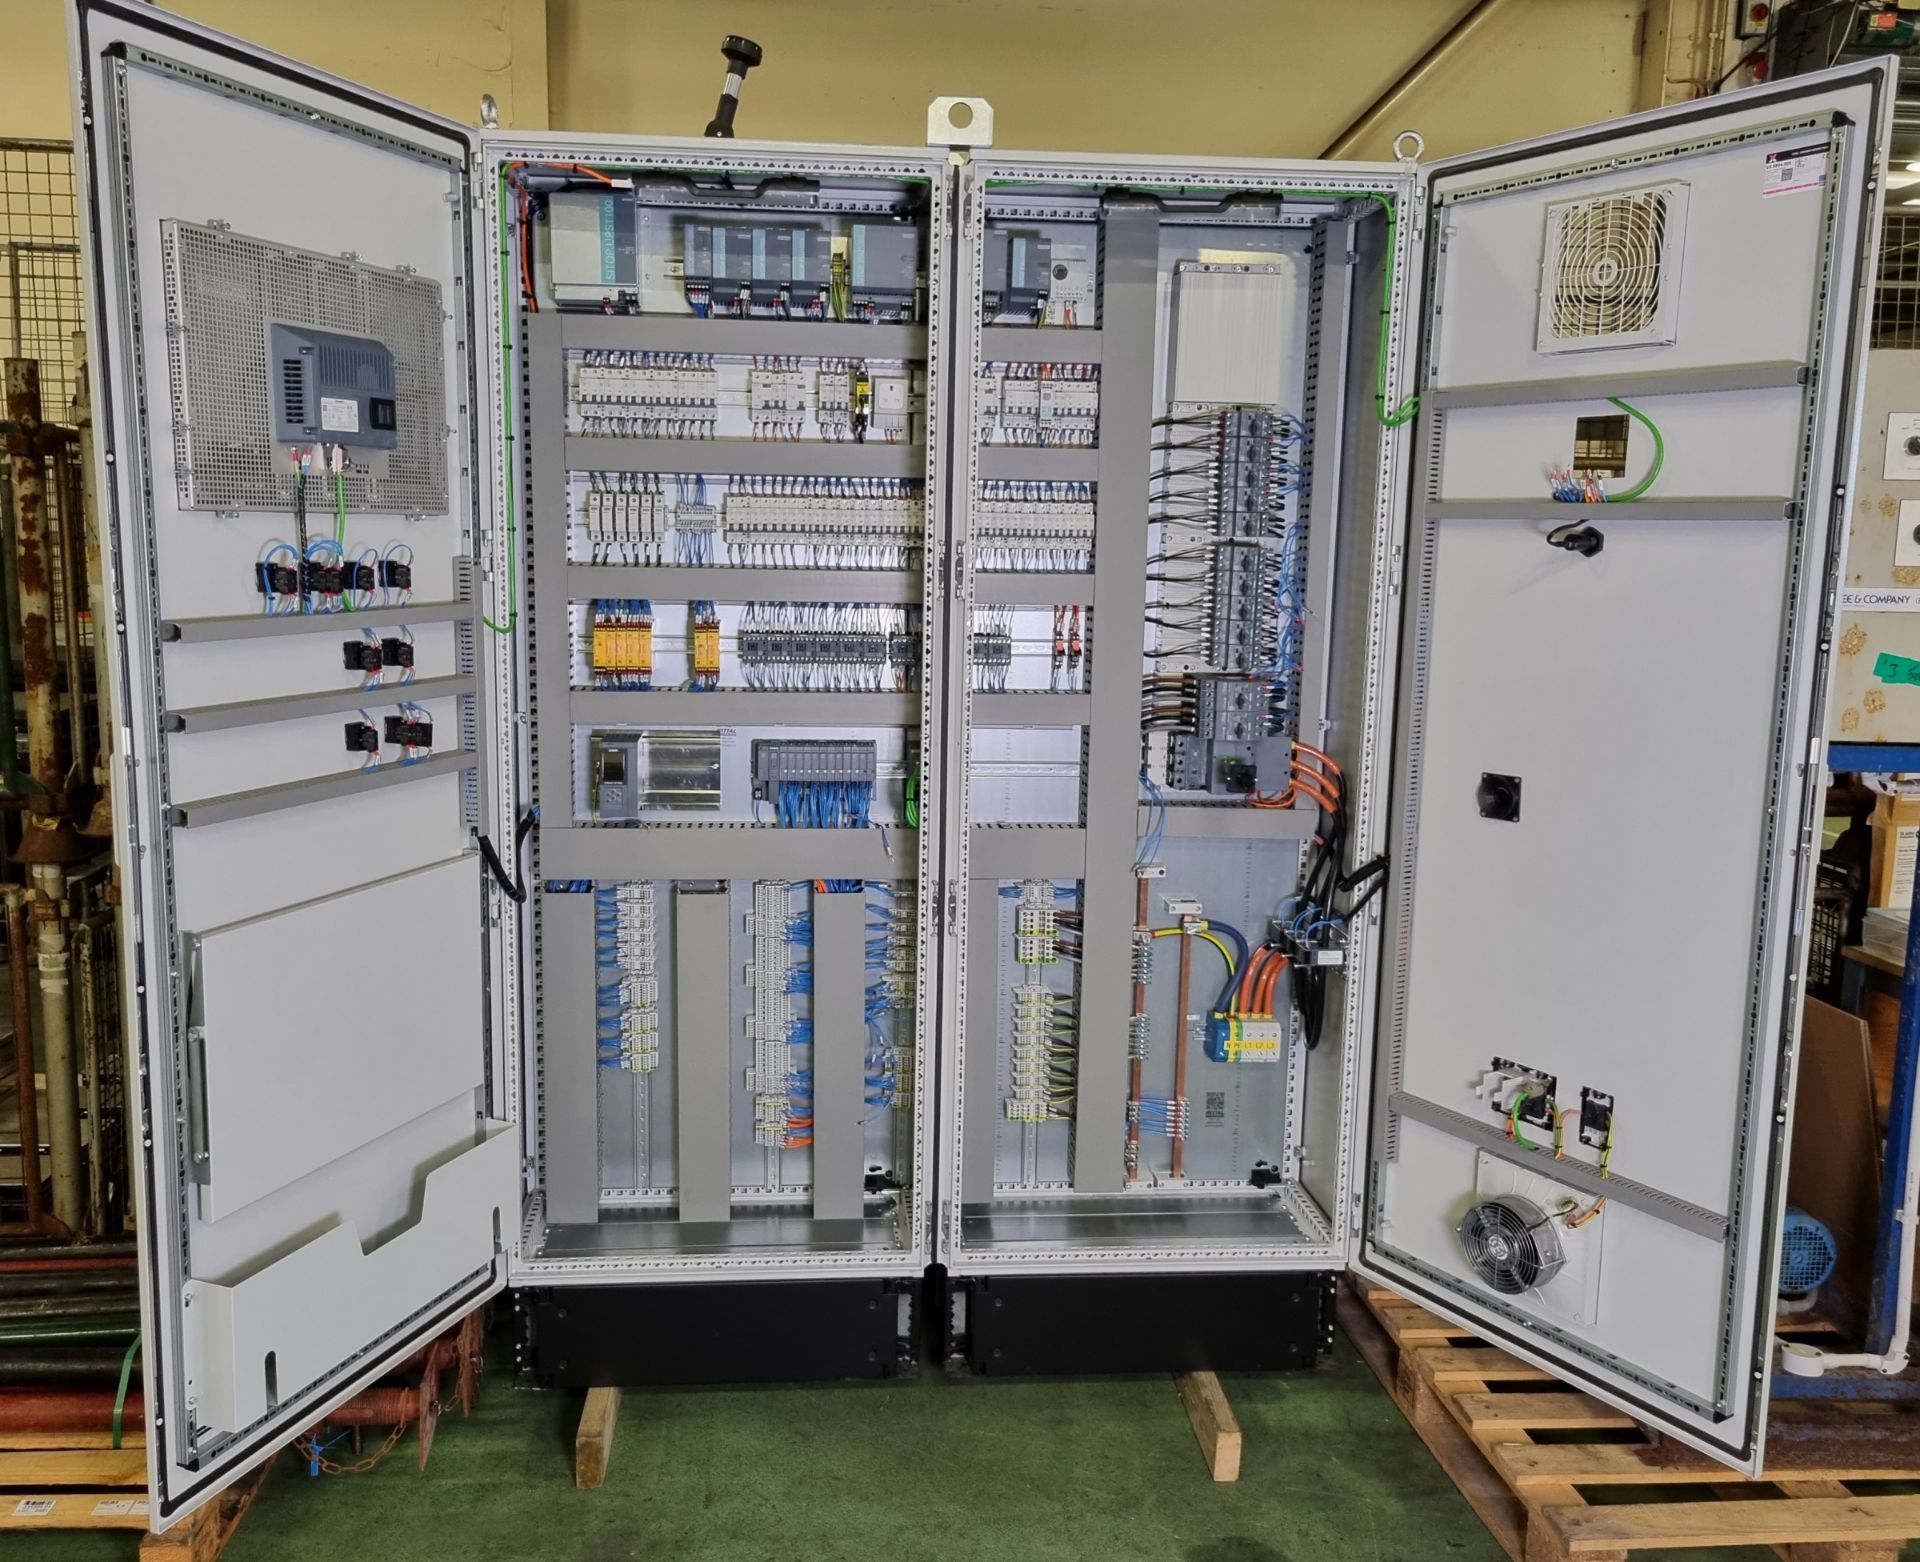 Siemens Power supply unit with siemens simatic Hmi touch panel in a Rittal VX25 - Image 3 of 10